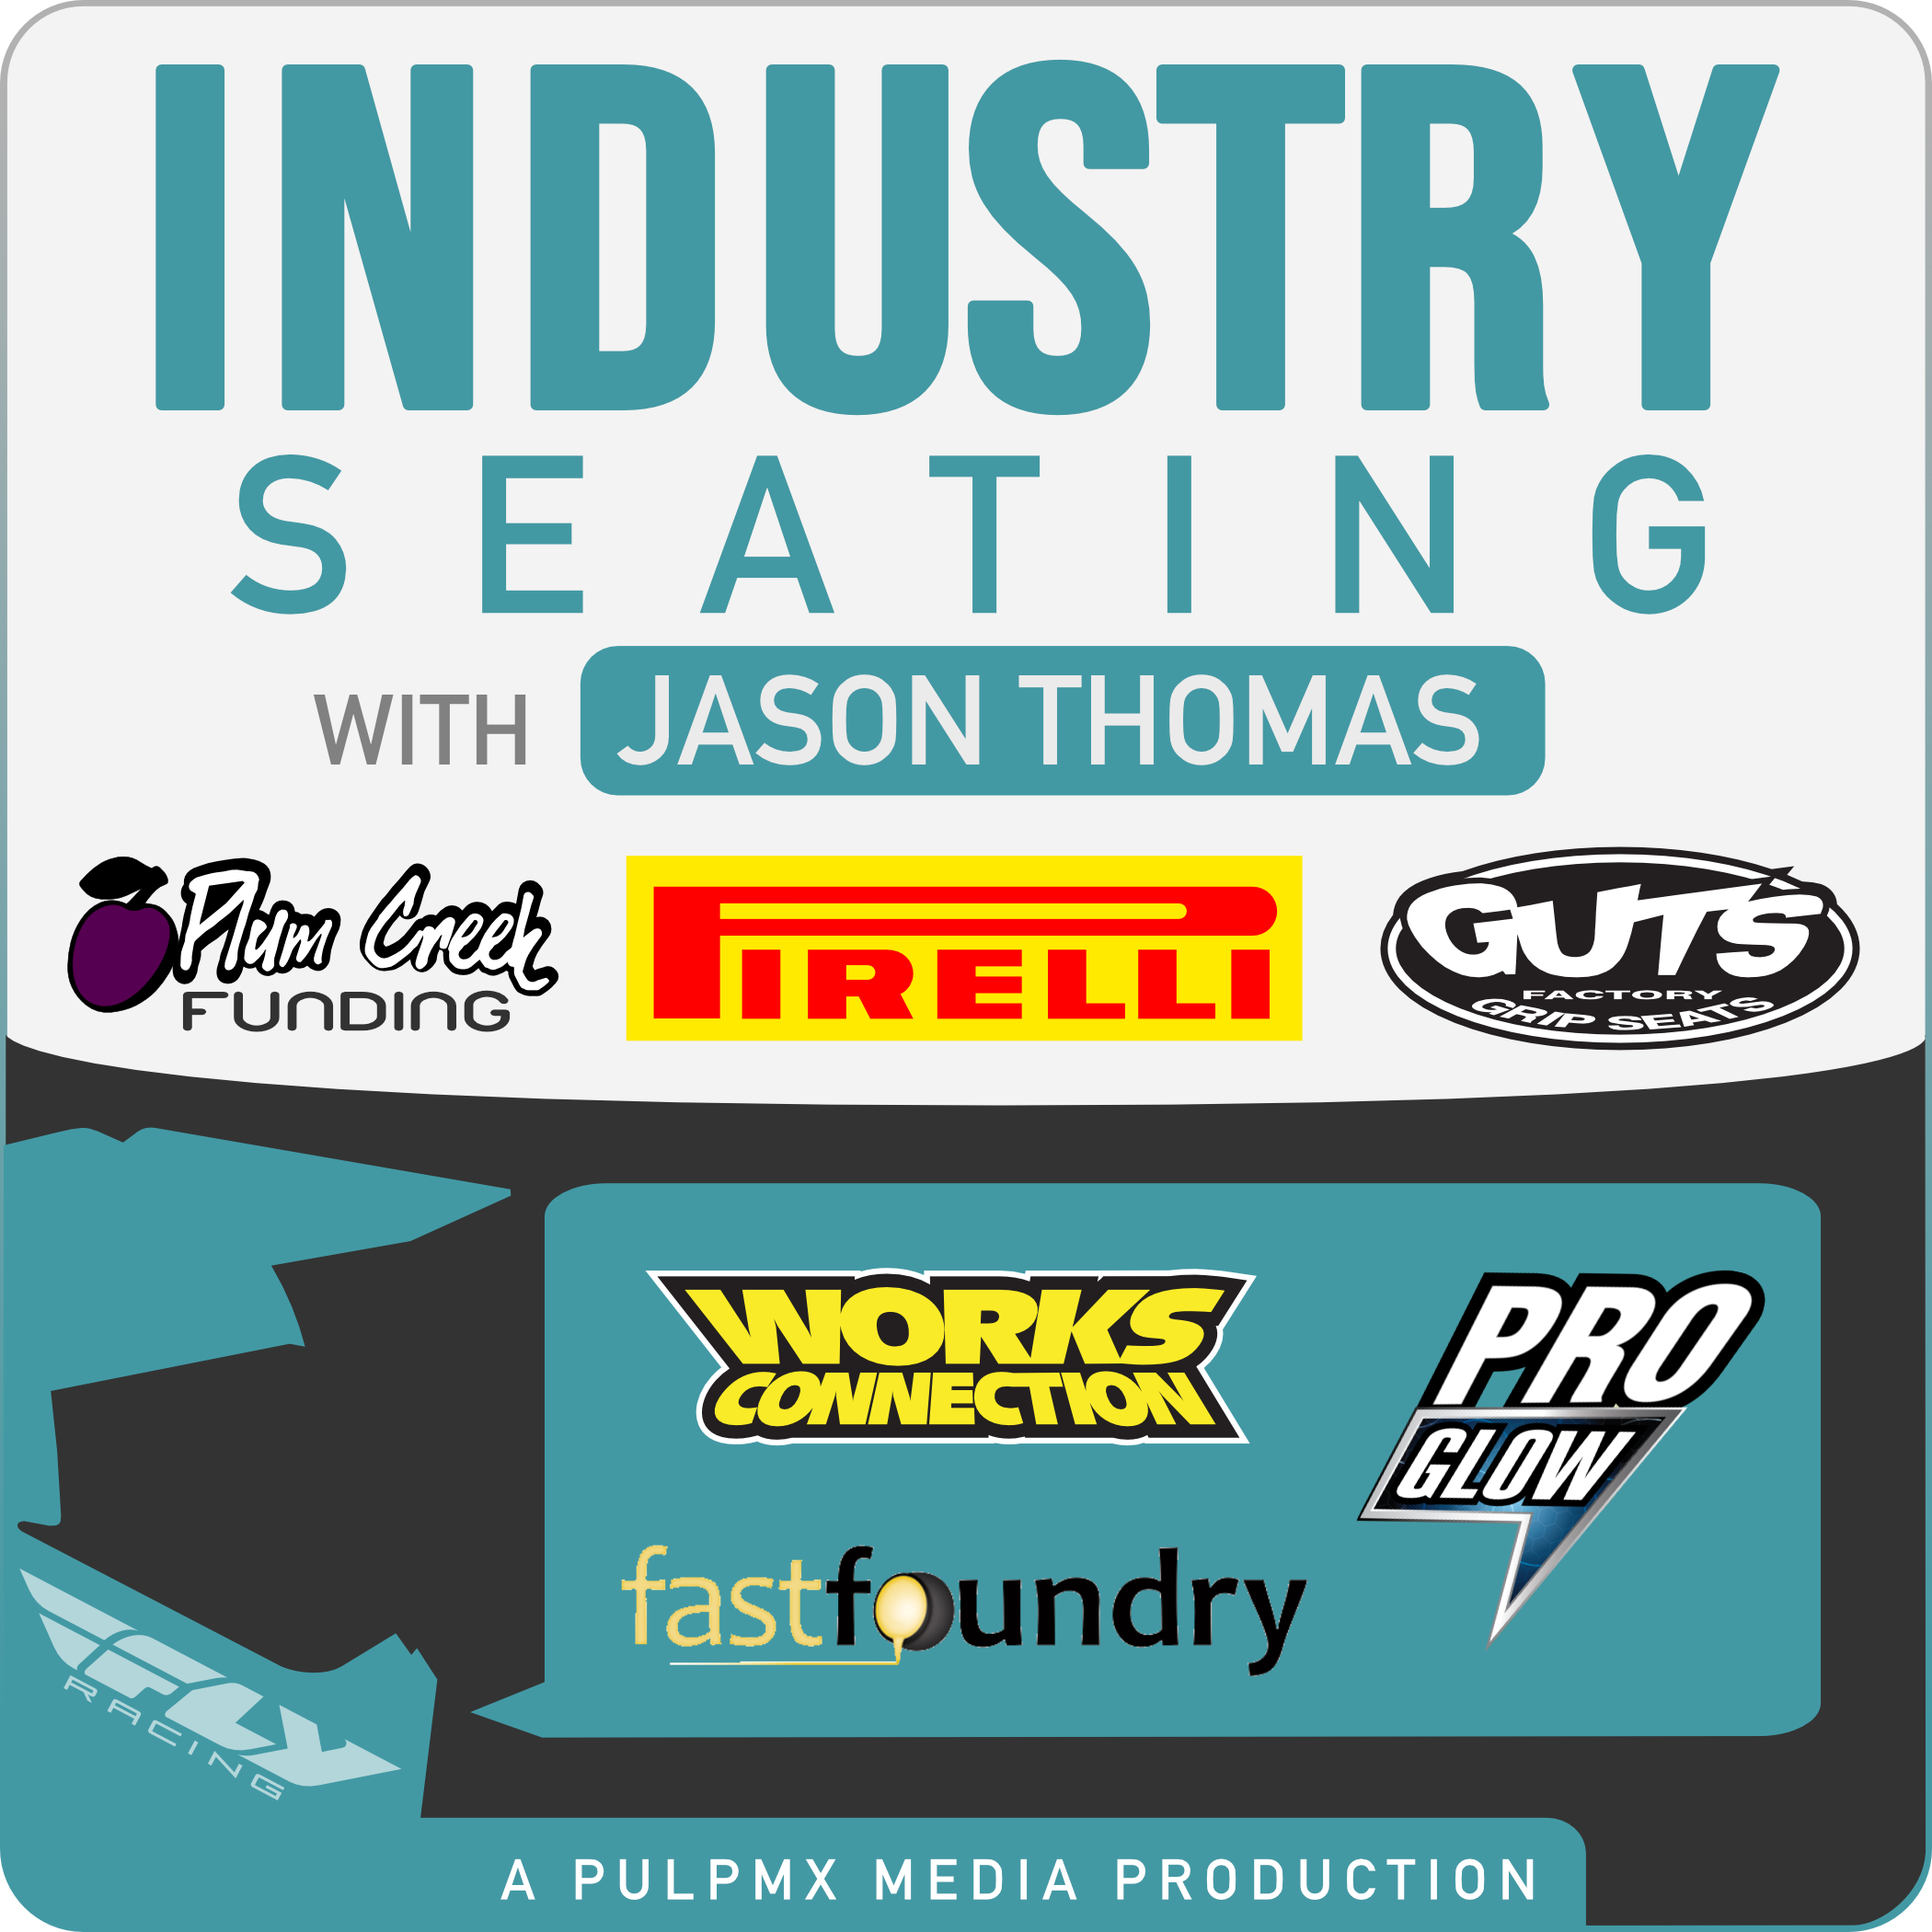 Industry Seating